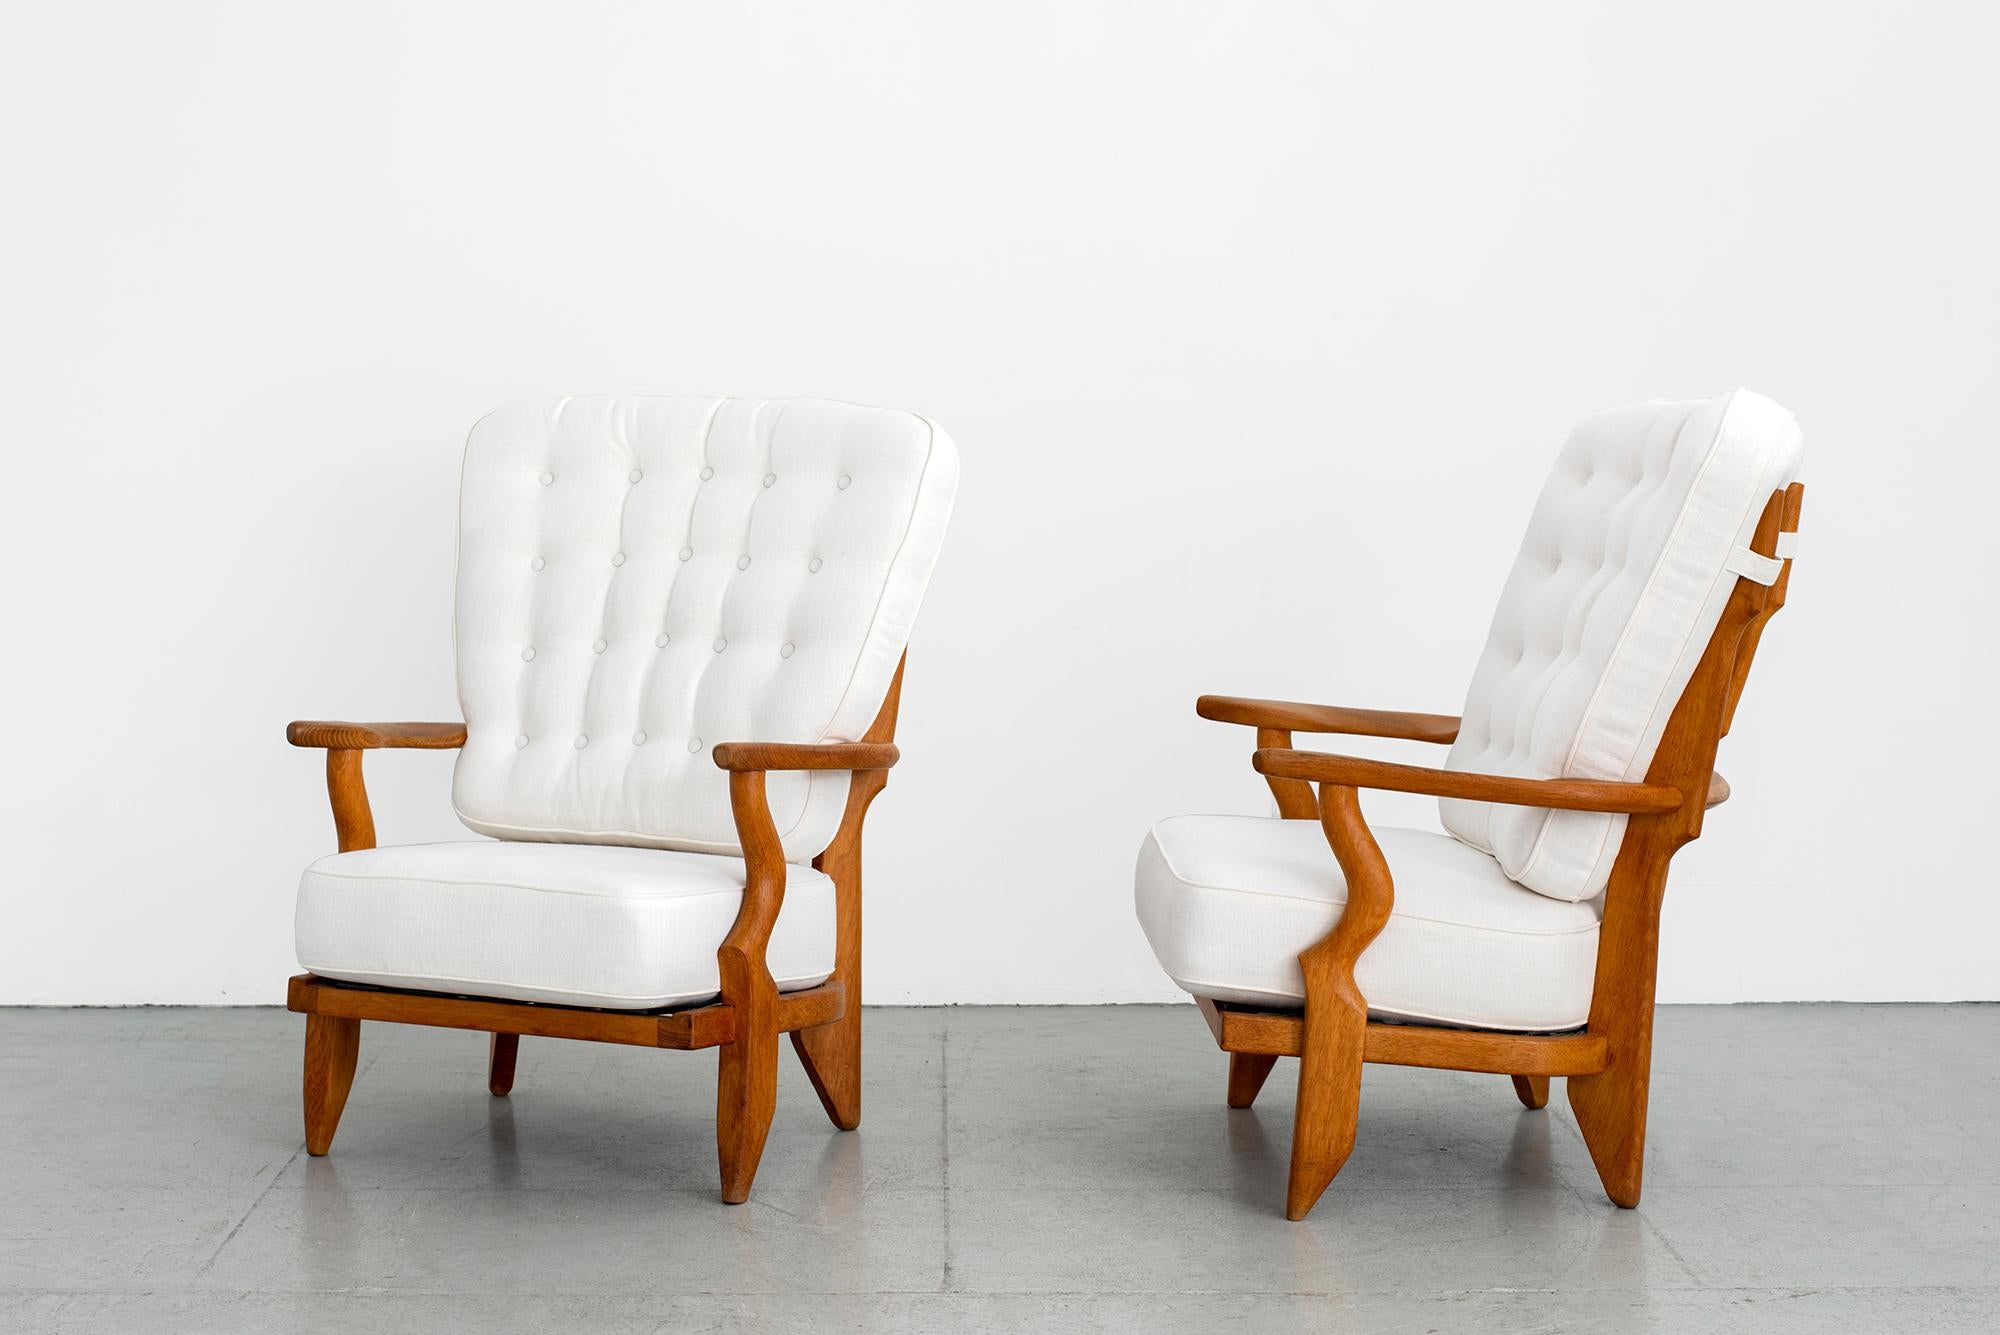 Incredible pair of armchairs chairs by Guillerme et Chambron.
Oak chairs with signature spindle back and great angled legged profile.
Newly upholstered in crisp white linen.